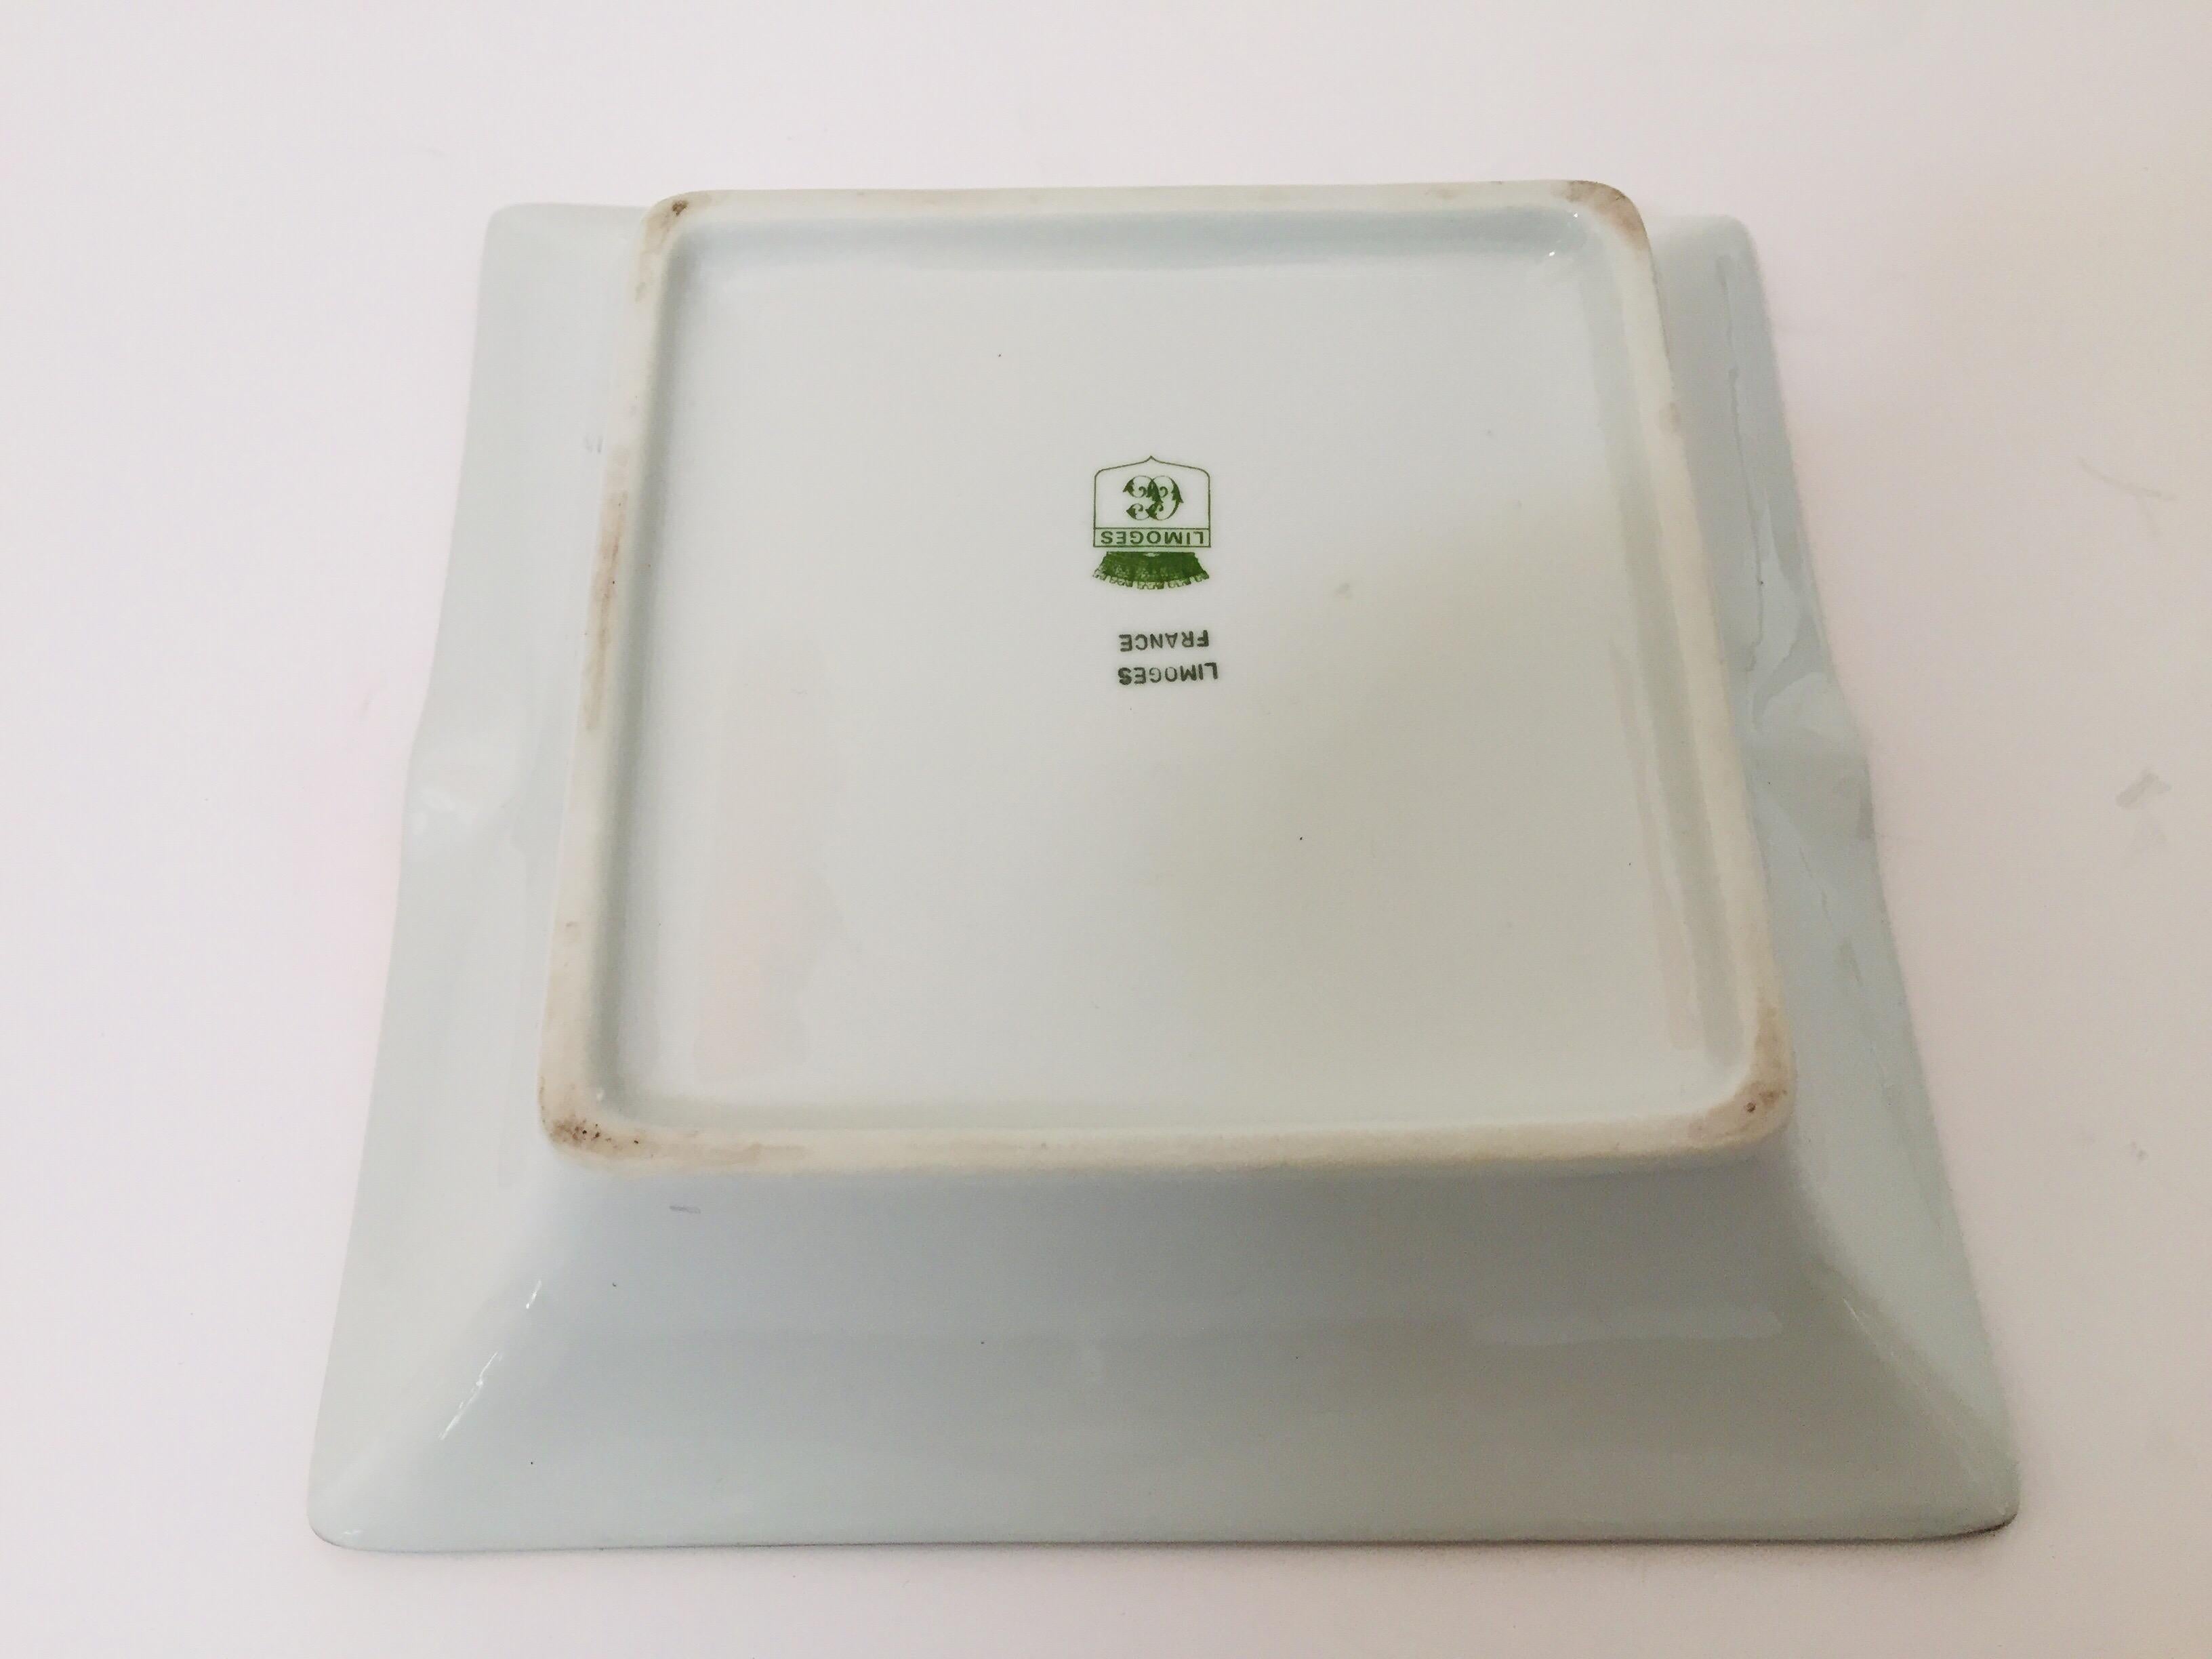 French Bauhaus Porcelain Square Green and Gold  Ashtray Limoges, France